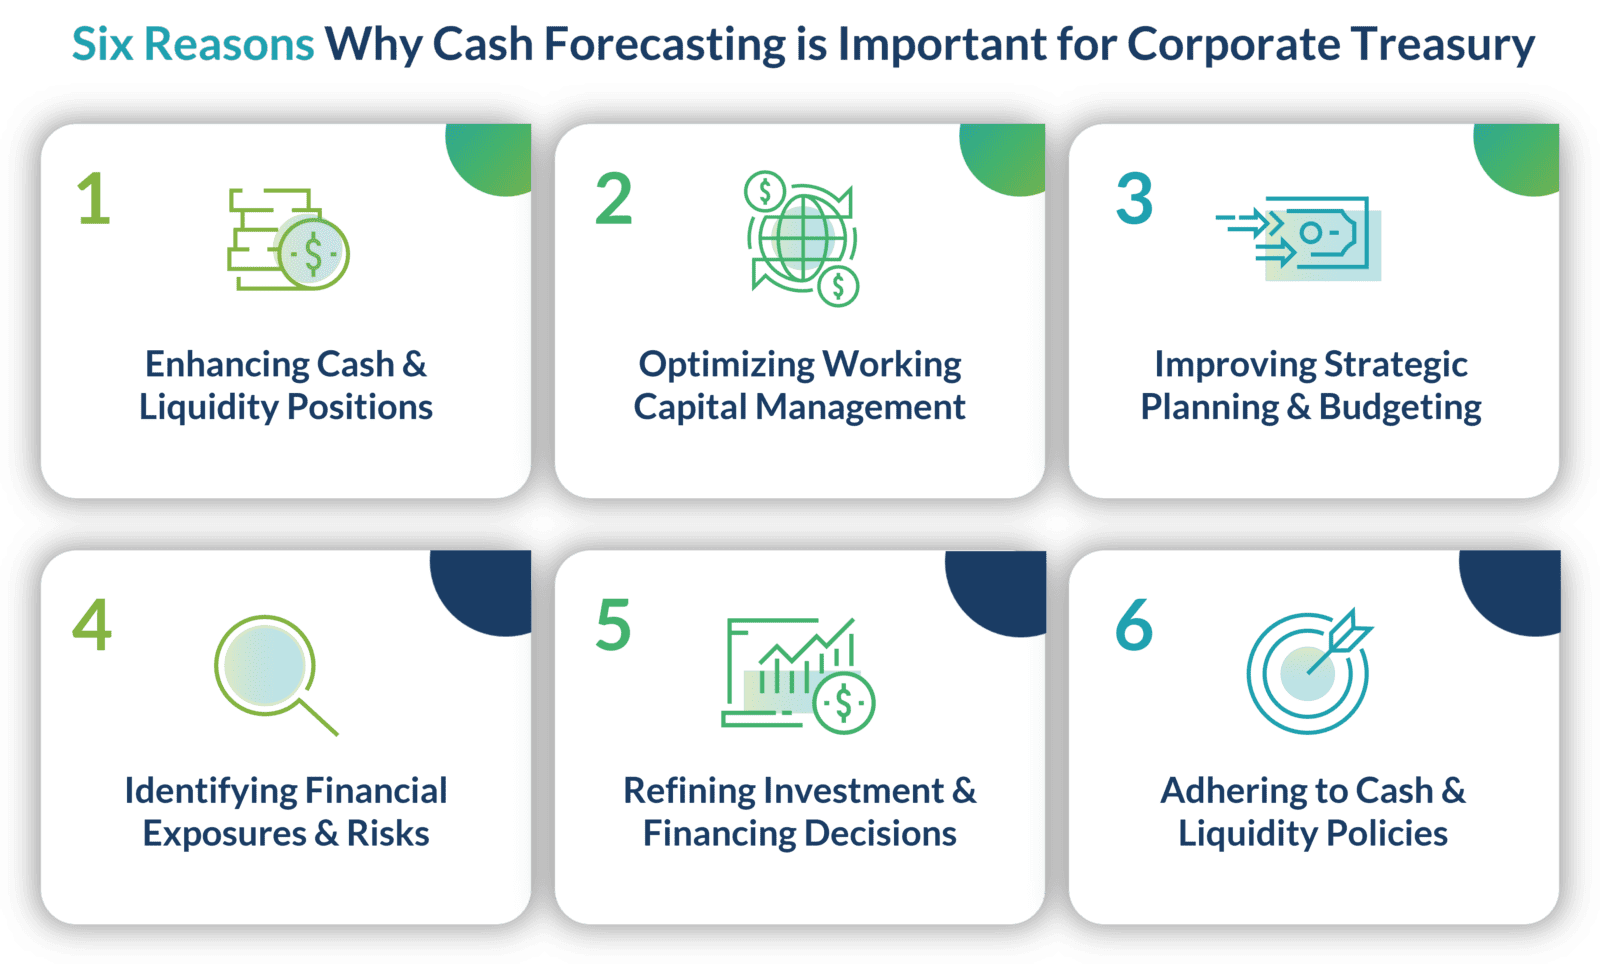 Six reasons why the cash forecasting function is so important for corporate treasury teams. 